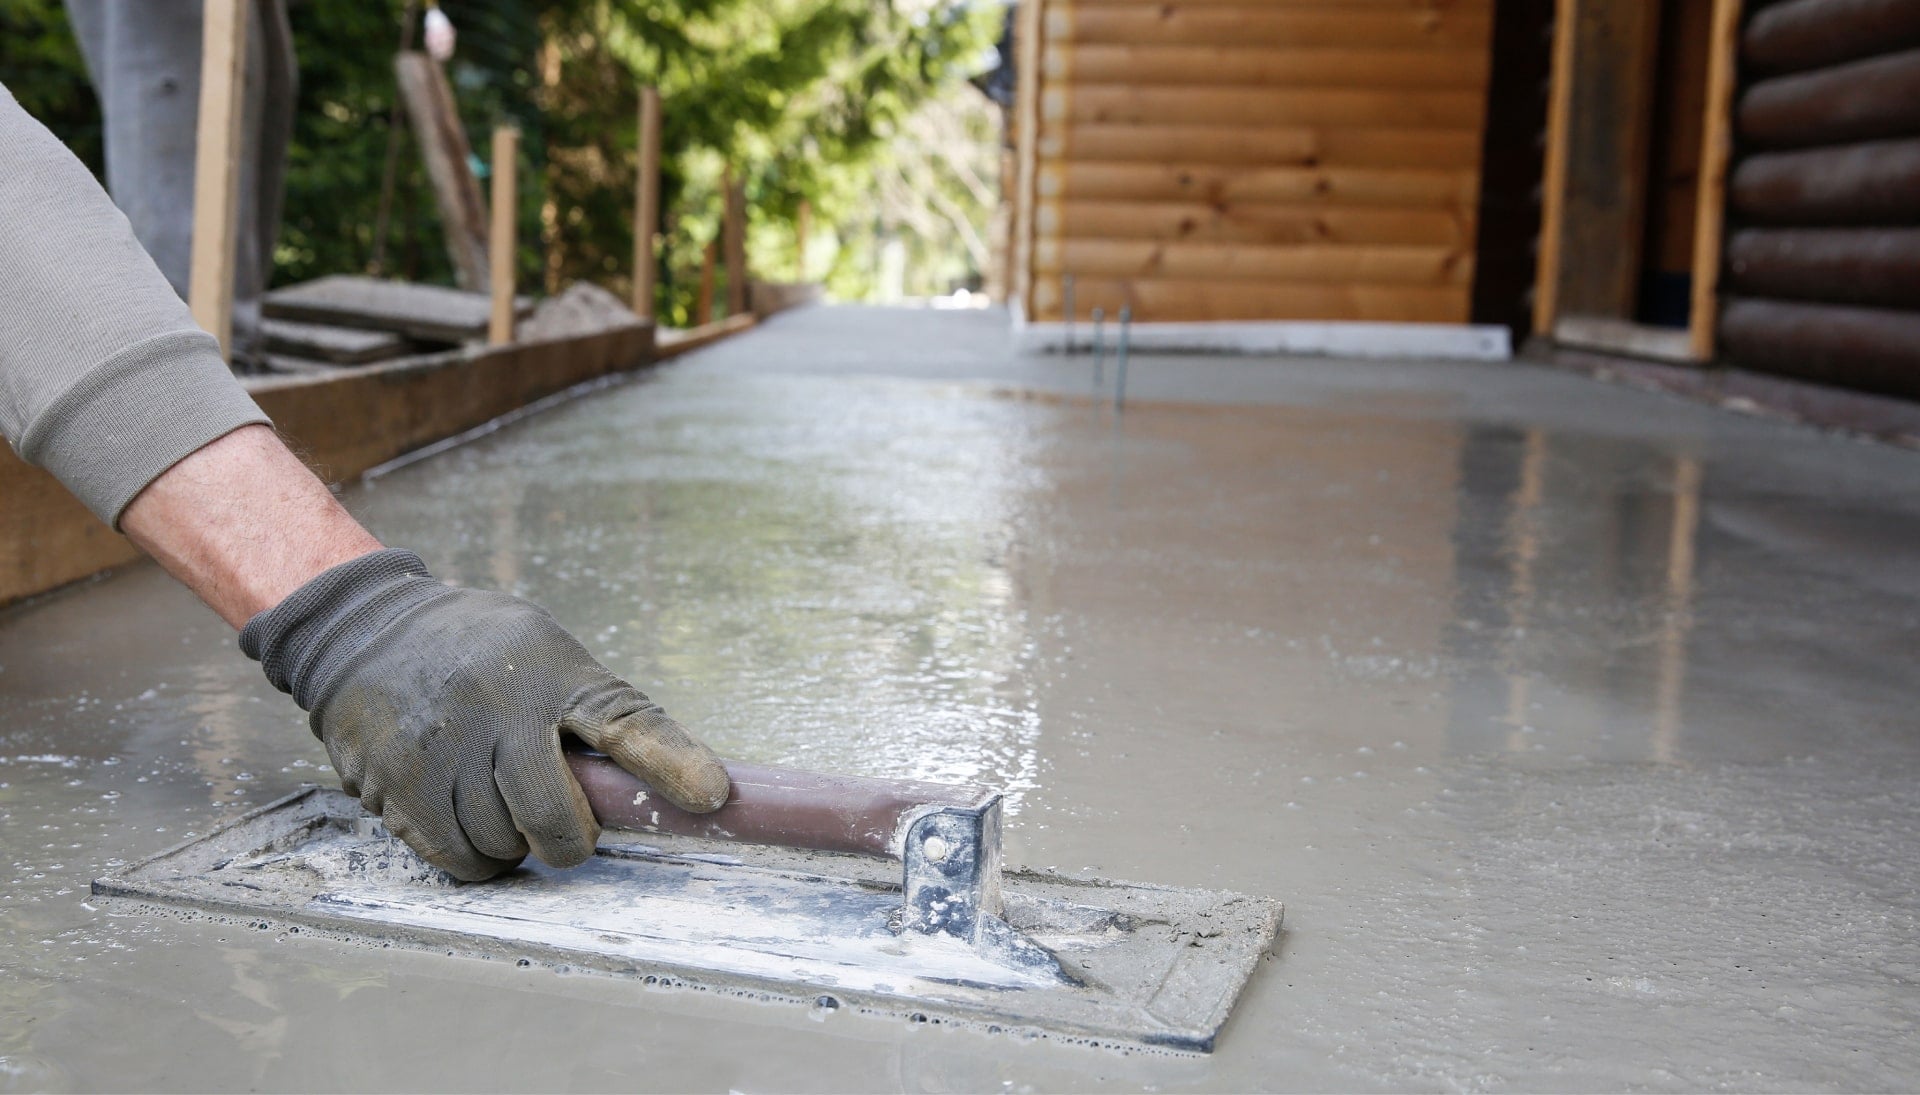 Smooth and Level Your Floors with Precision Concrete Floor Leveling Services in Pleasant Hill, CA - Eliminate Uneven Surfaces, Tripping Hazards, and Costly Damages with State-of-the-Art Equipment and Skilled Professionals.